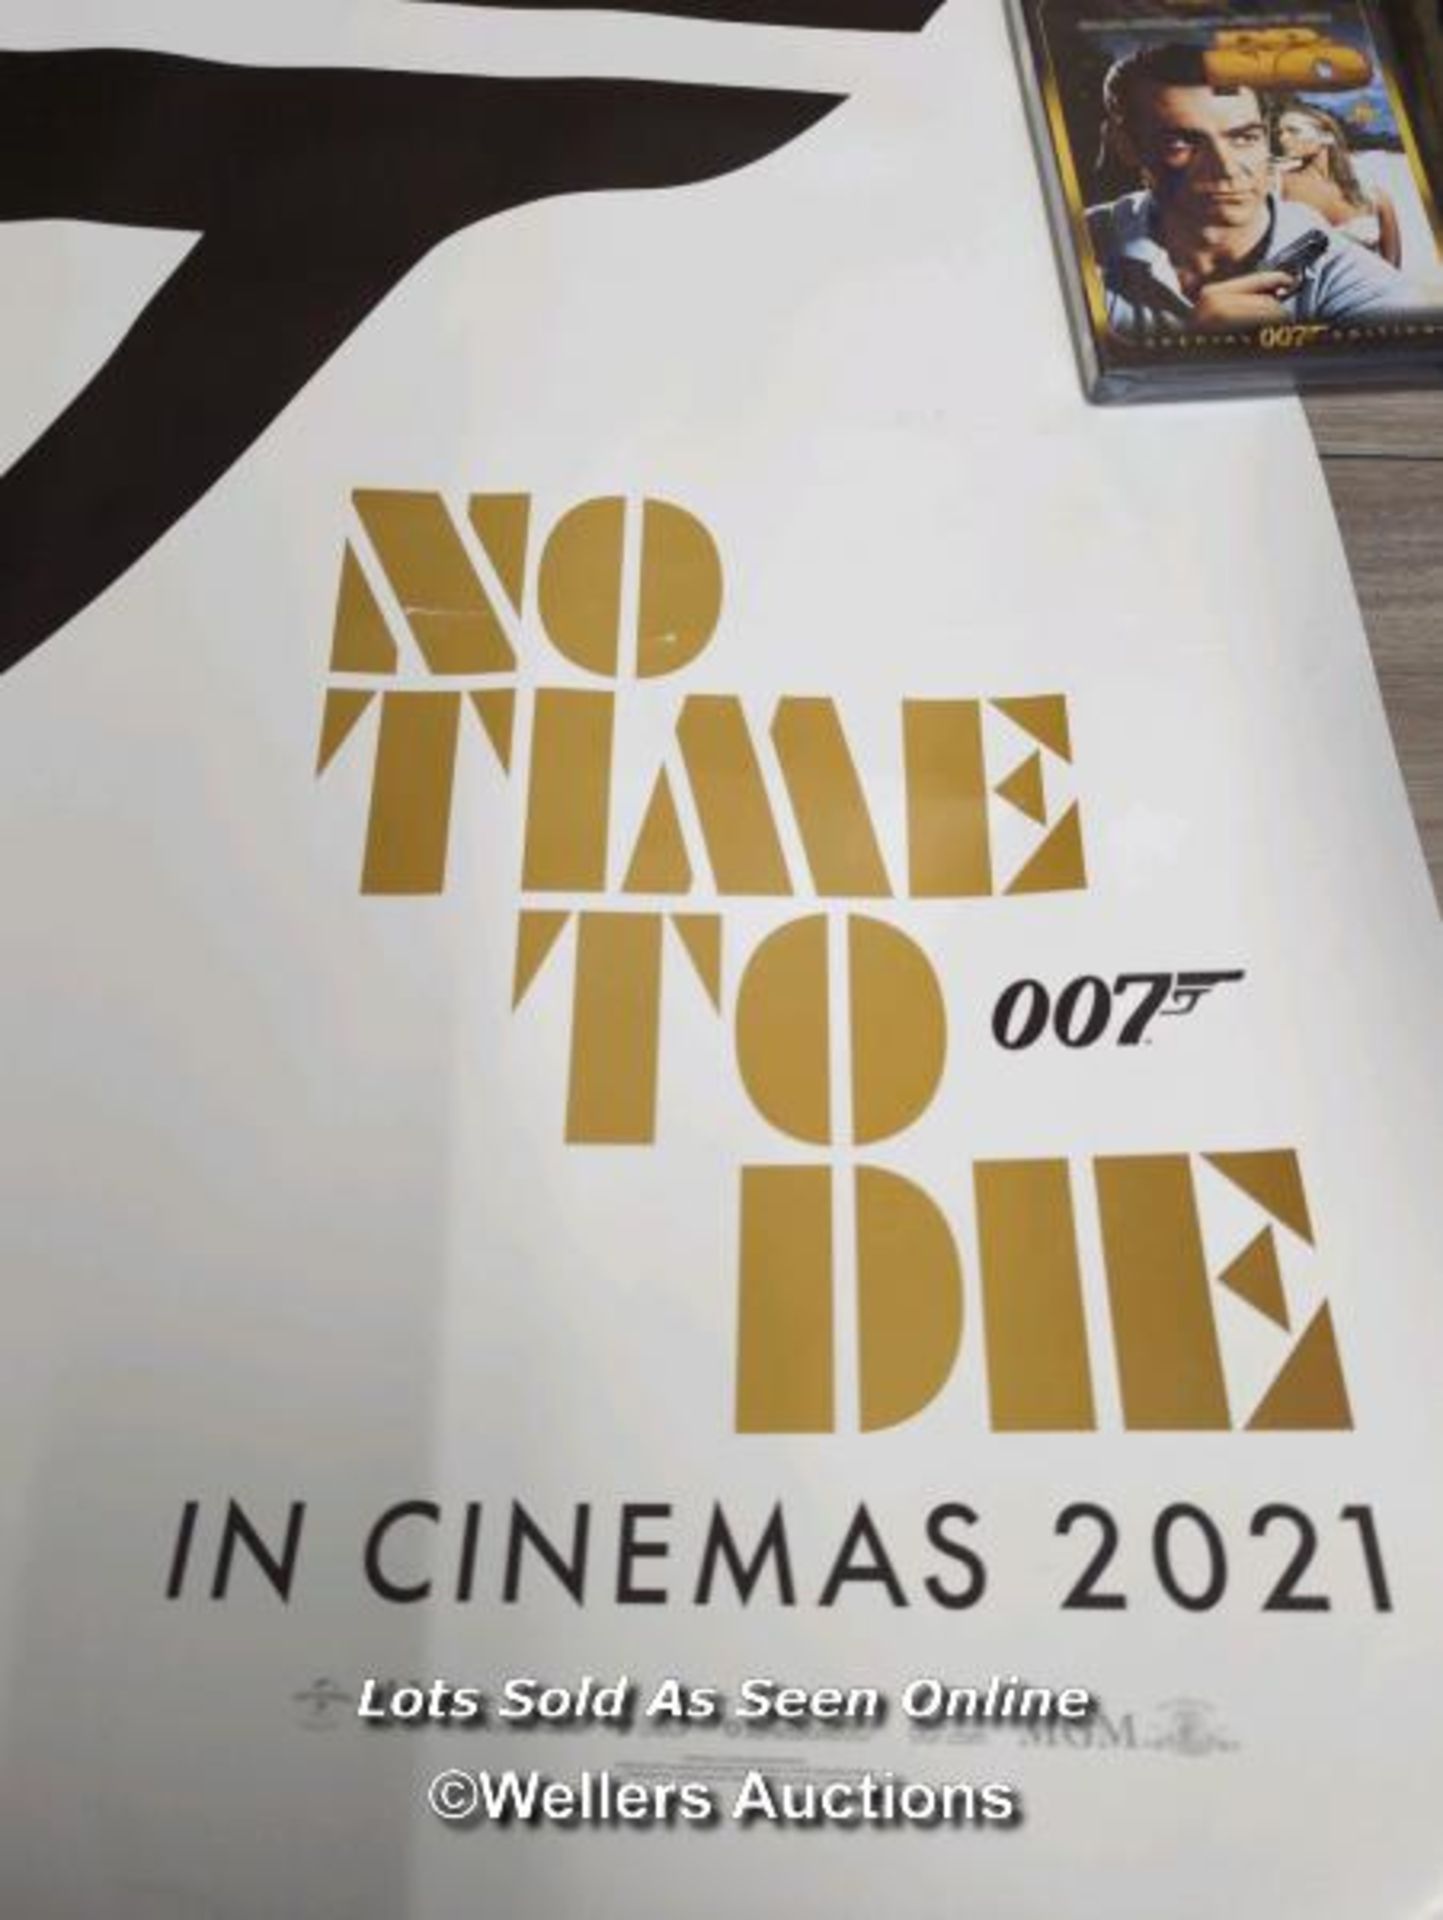 JAMES BOND - NO TIME TO DIE CINEMA POSTER, 100 X 76.5CM WITH A NEW & SEALED DVD OF DRY NO - Image 3 of 3